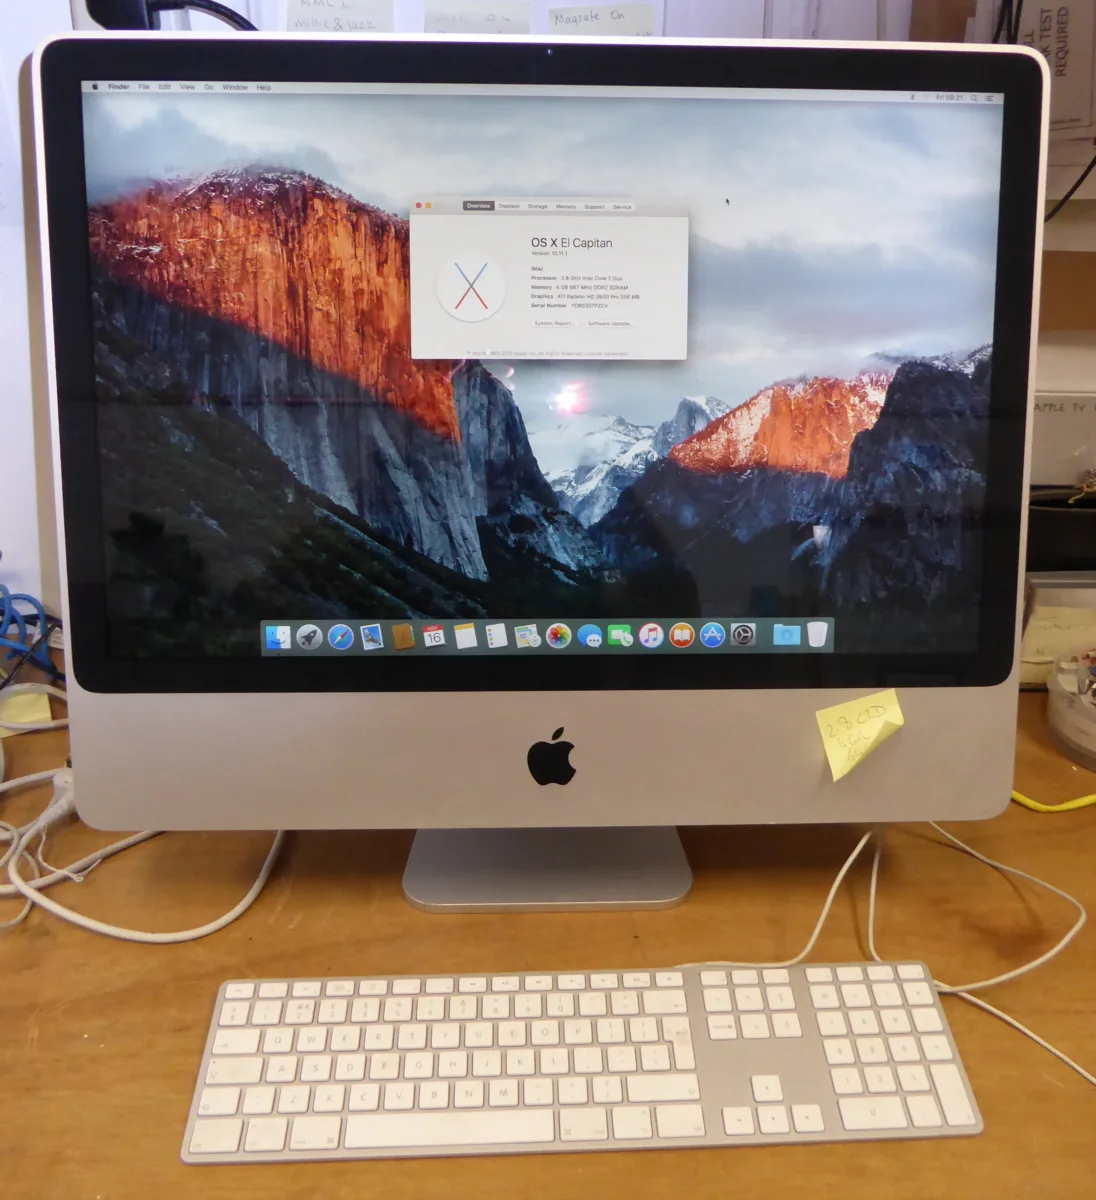 Is a 2007 iMac Still a Reliable Option? 1